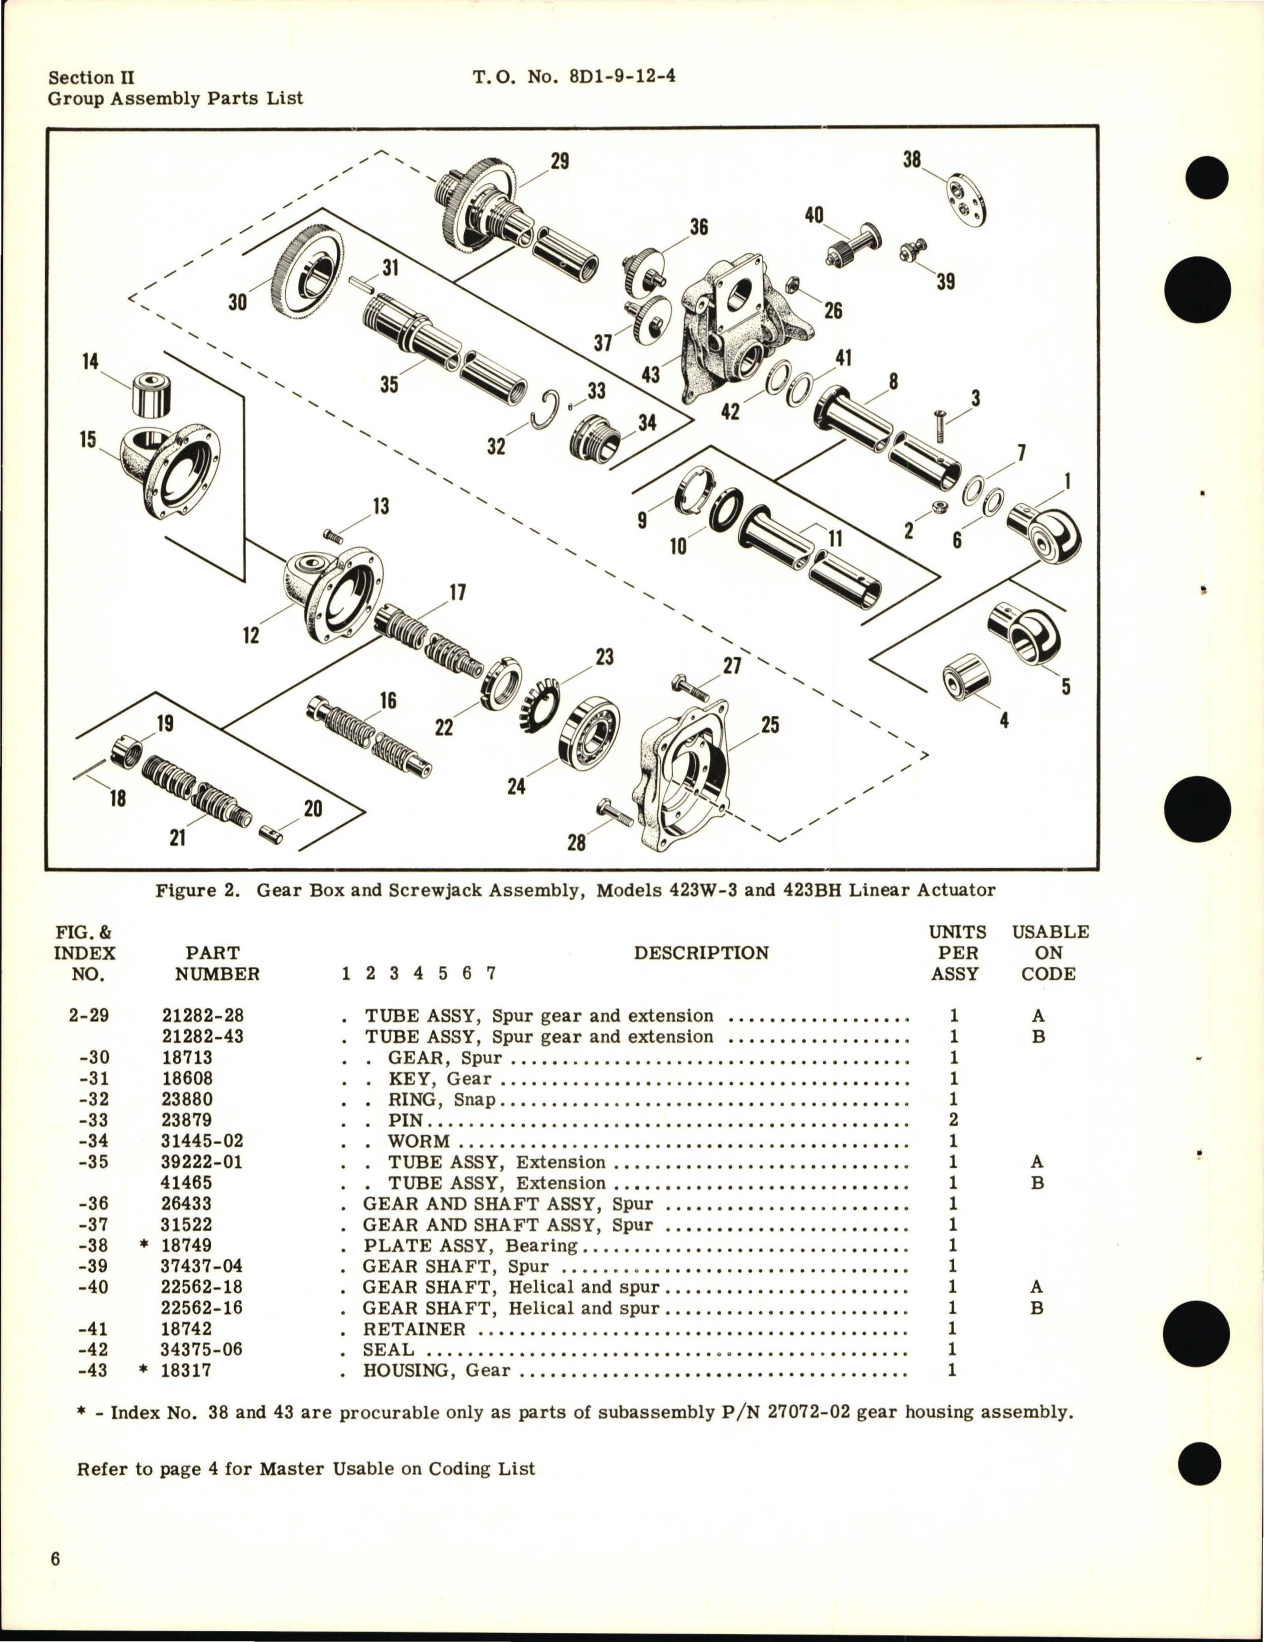 Sample page 8 from AirCorps Library document: Illustrated Parts Breakdown for Linear Actuator Assembly 423 Series